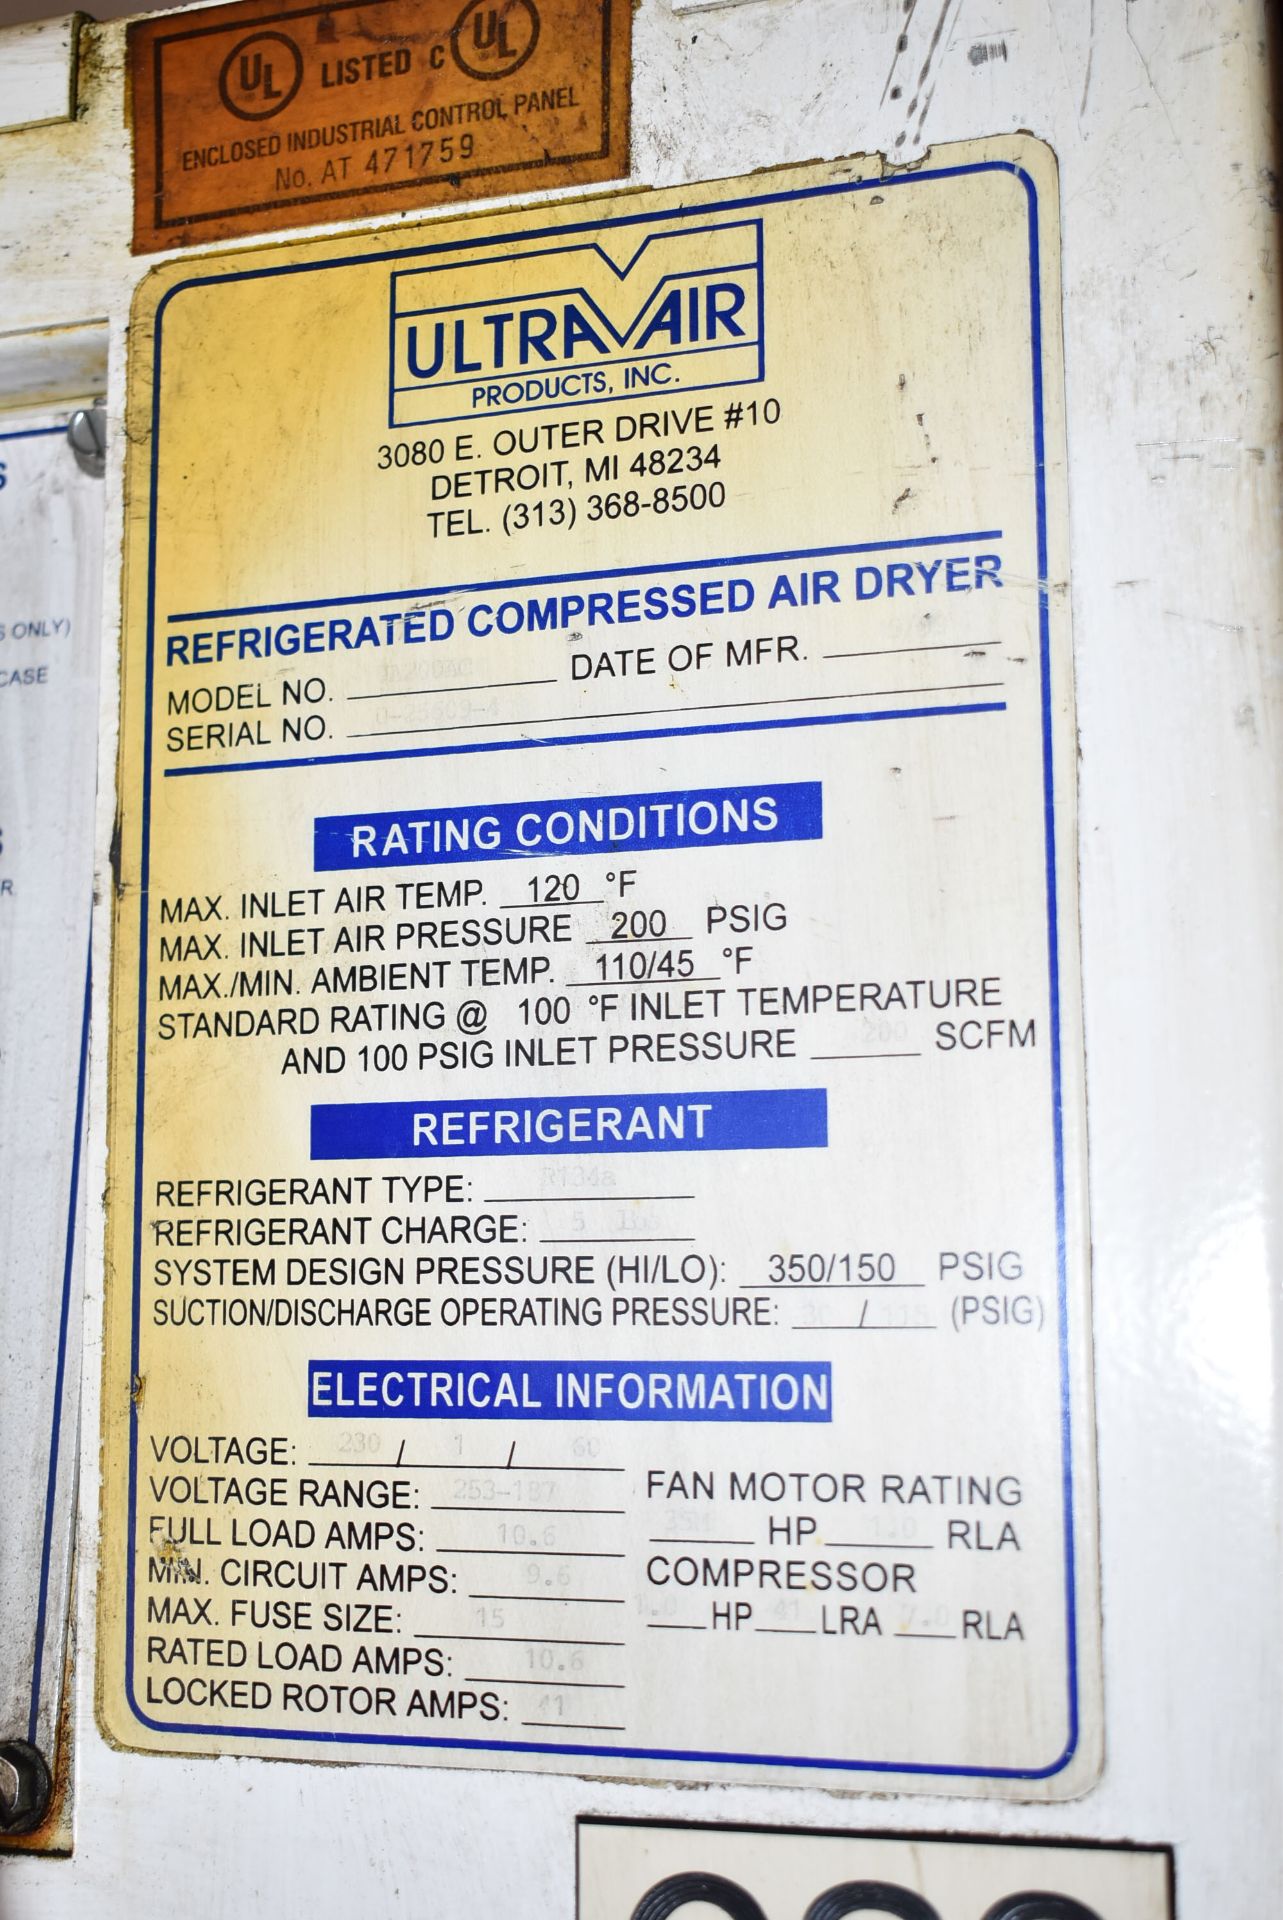 ULTRA AIR UA200AC REFRIGERATED AIR DRYER WITH 1.0 HP, 200 PSIG, S/N: U-25609-4 (CI) [RIGGING FEES - Image 3 of 4